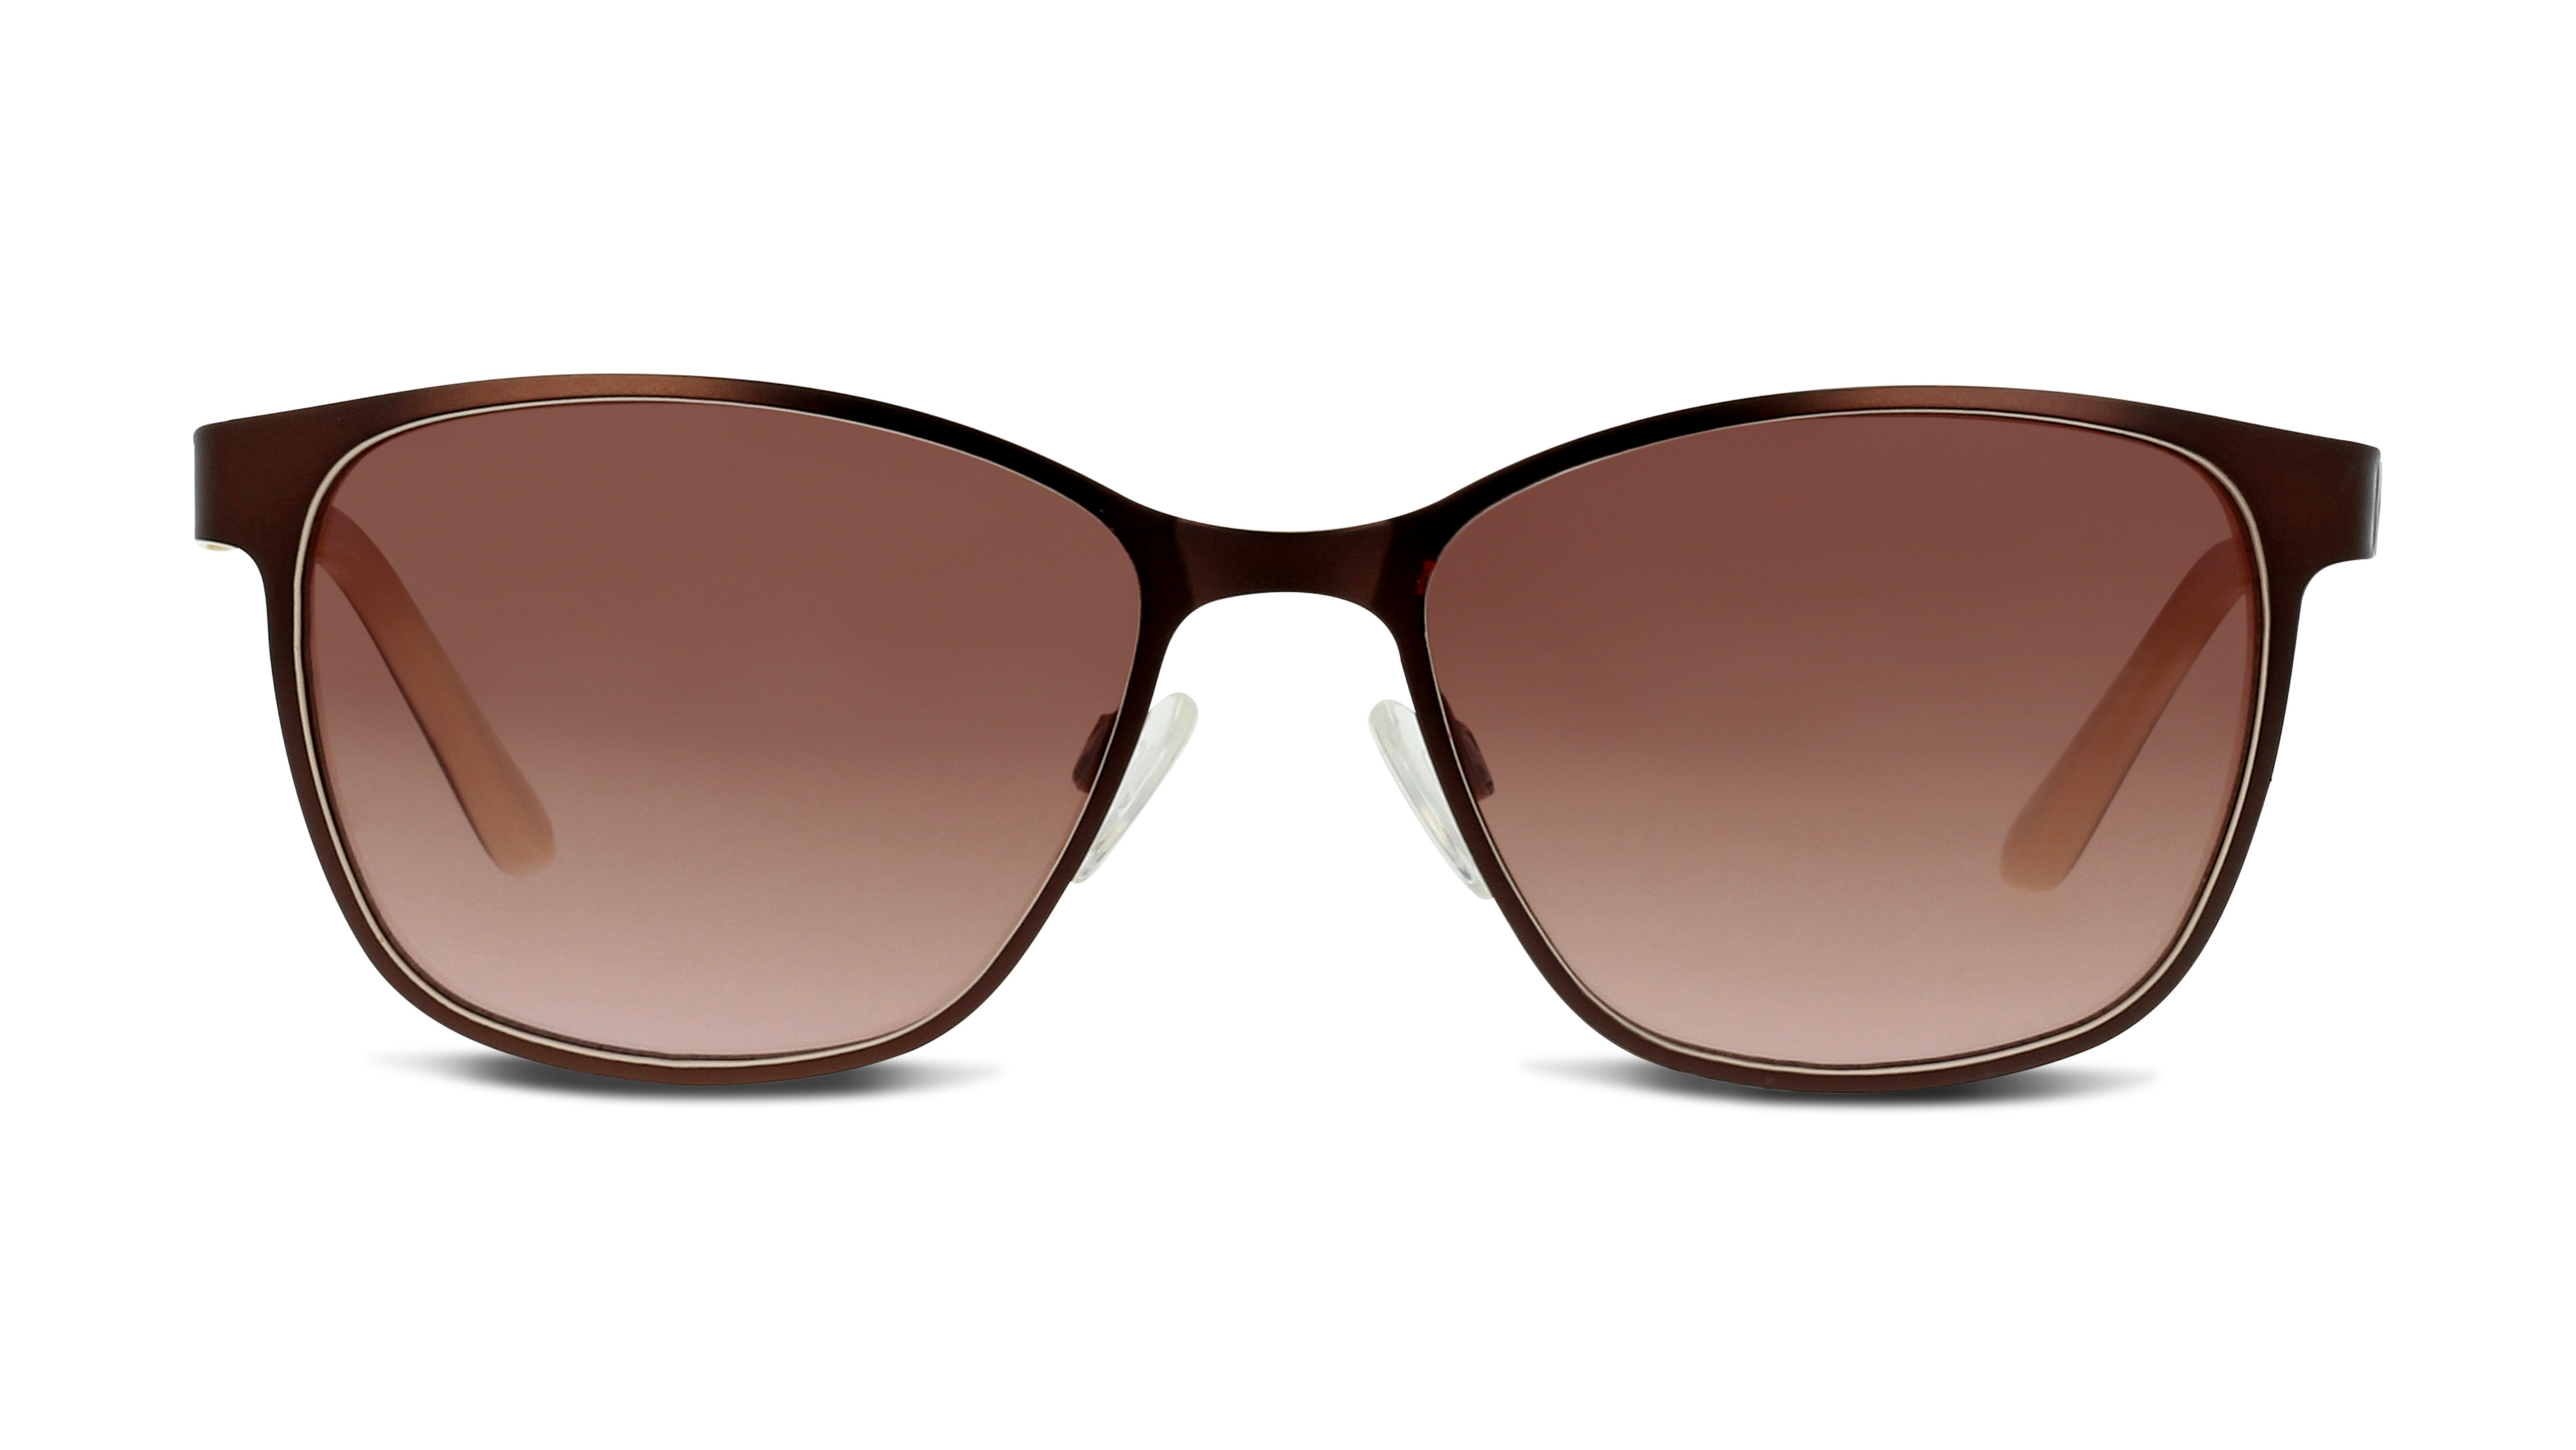 [products.image.front] HUMPHREY´S eyewear 585224 601065 Sonnenbrille